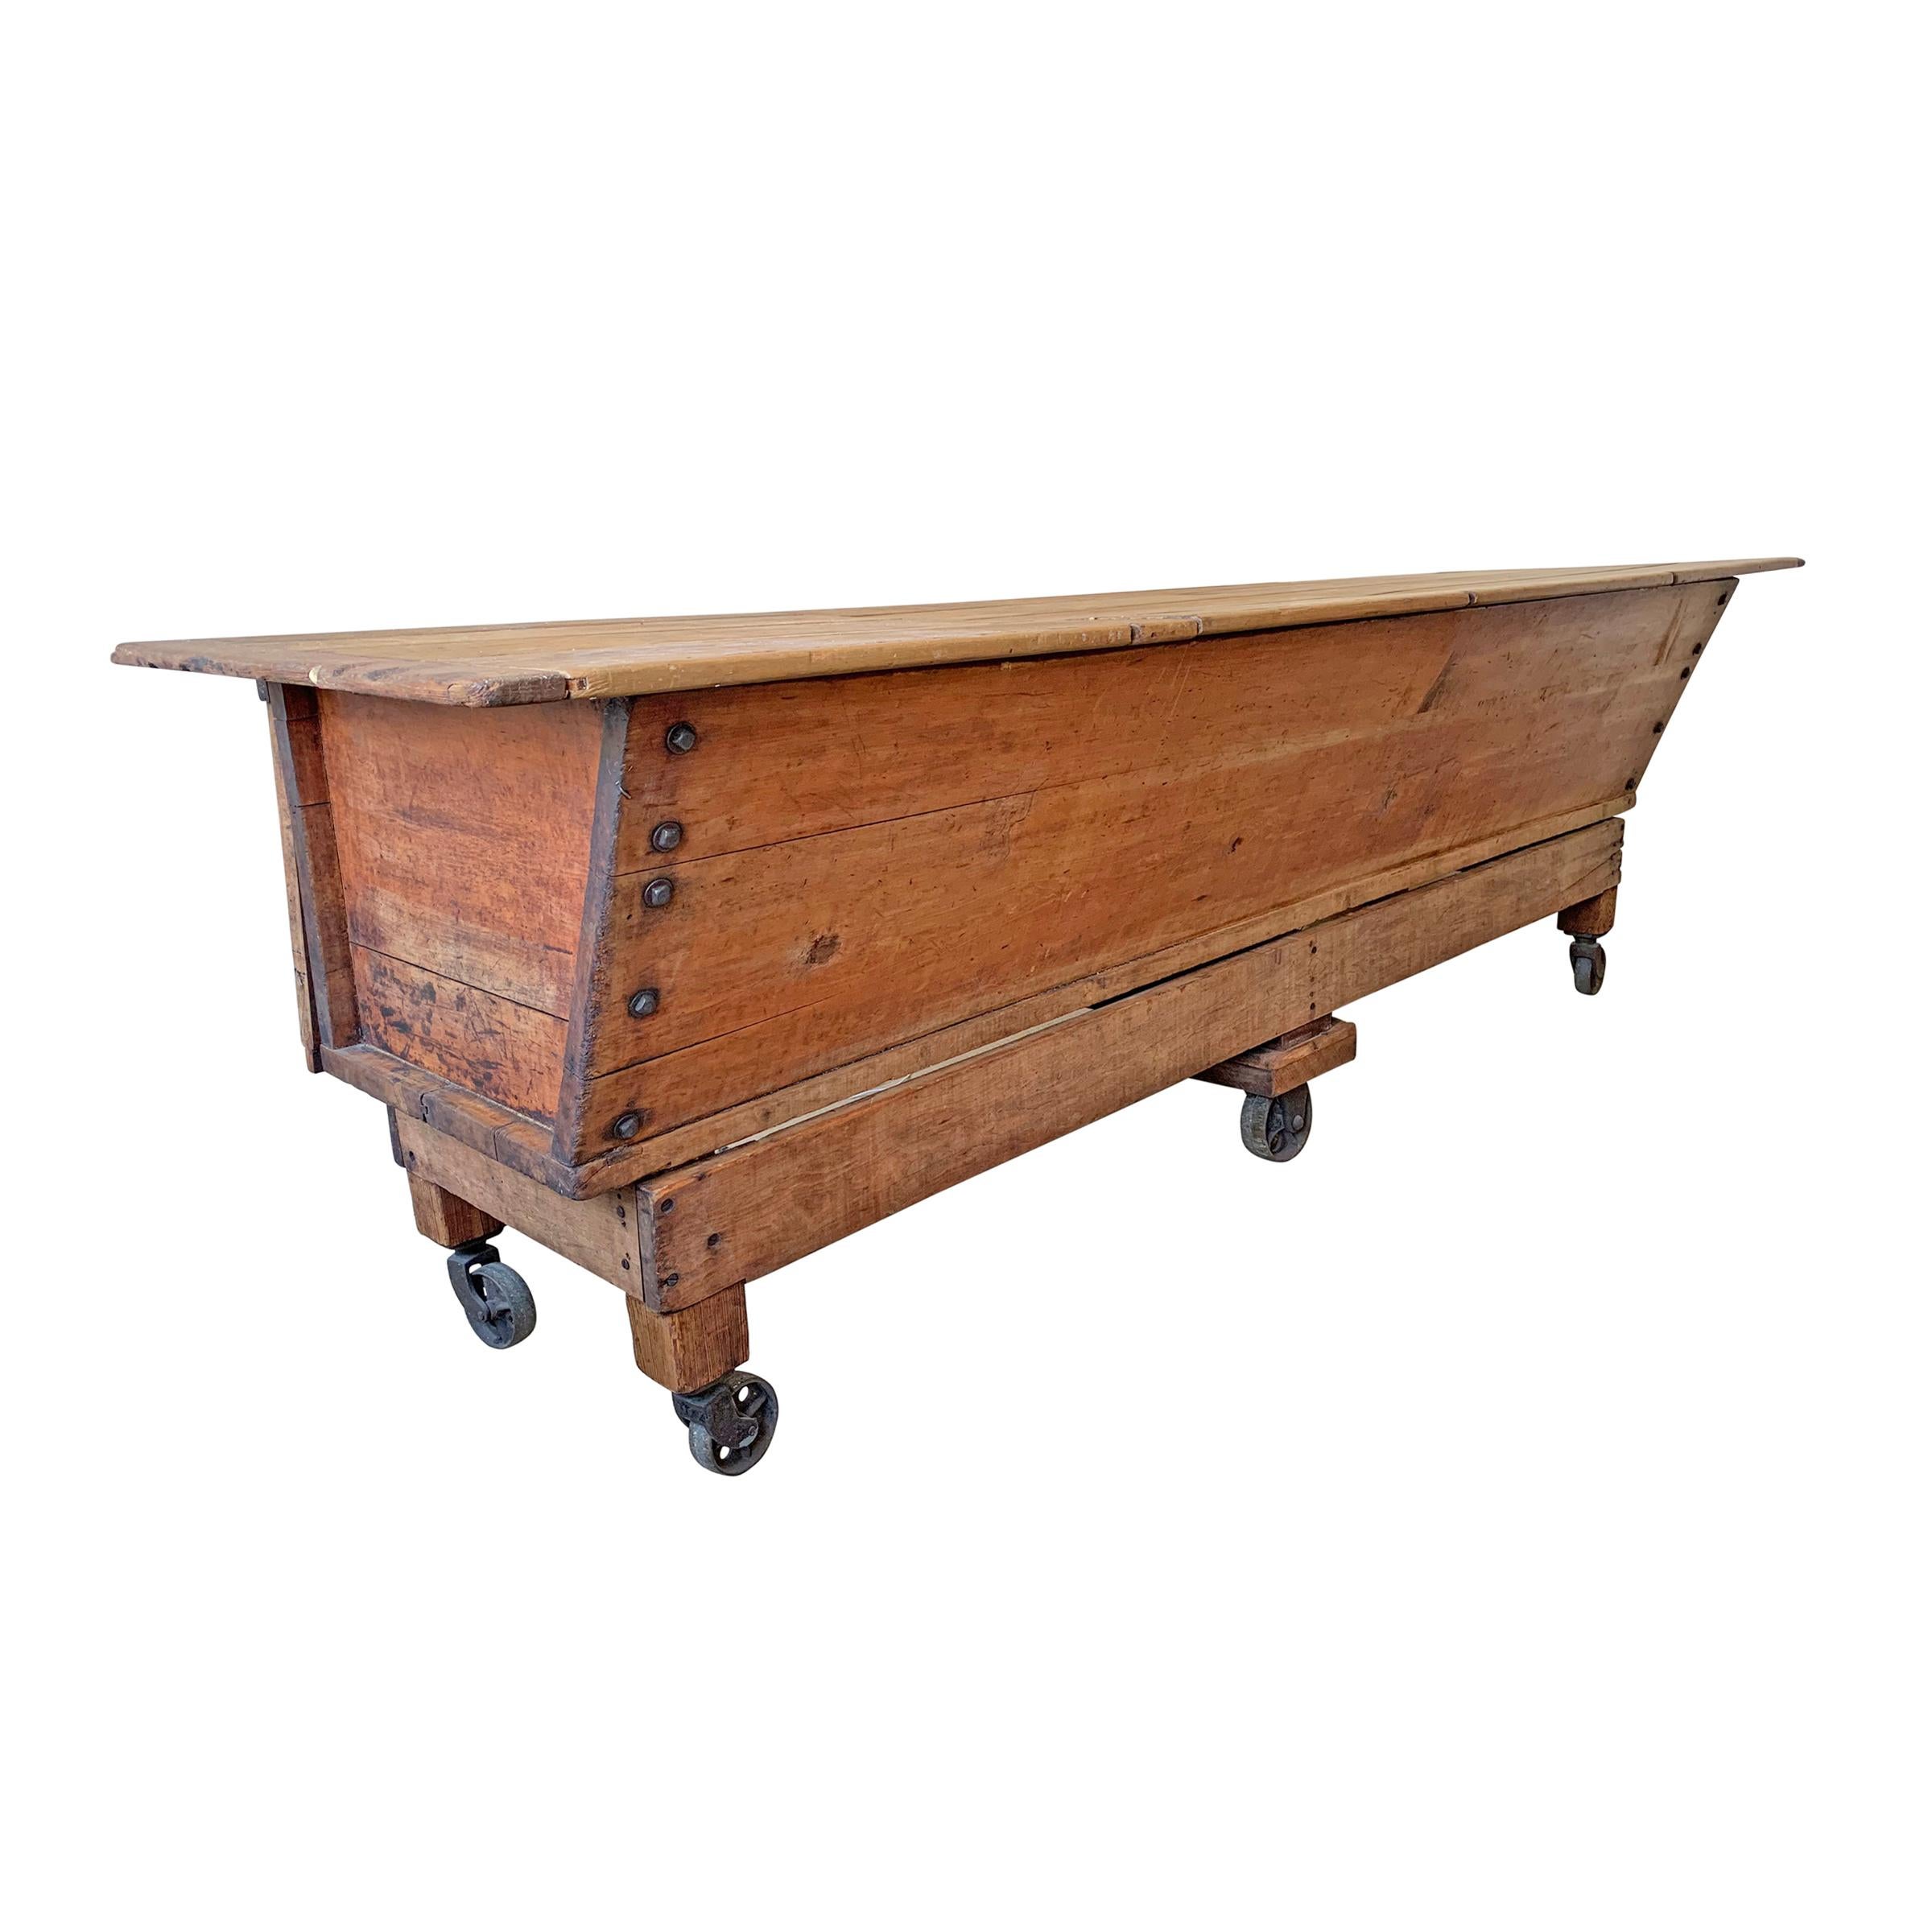 An incredible late 19th century American dough table from a commercial bakery with a two-part removable top and a chamber that was originally used to proof balls of dough. This is the ultimate console table, sideboard, shop counter, kitchen island,